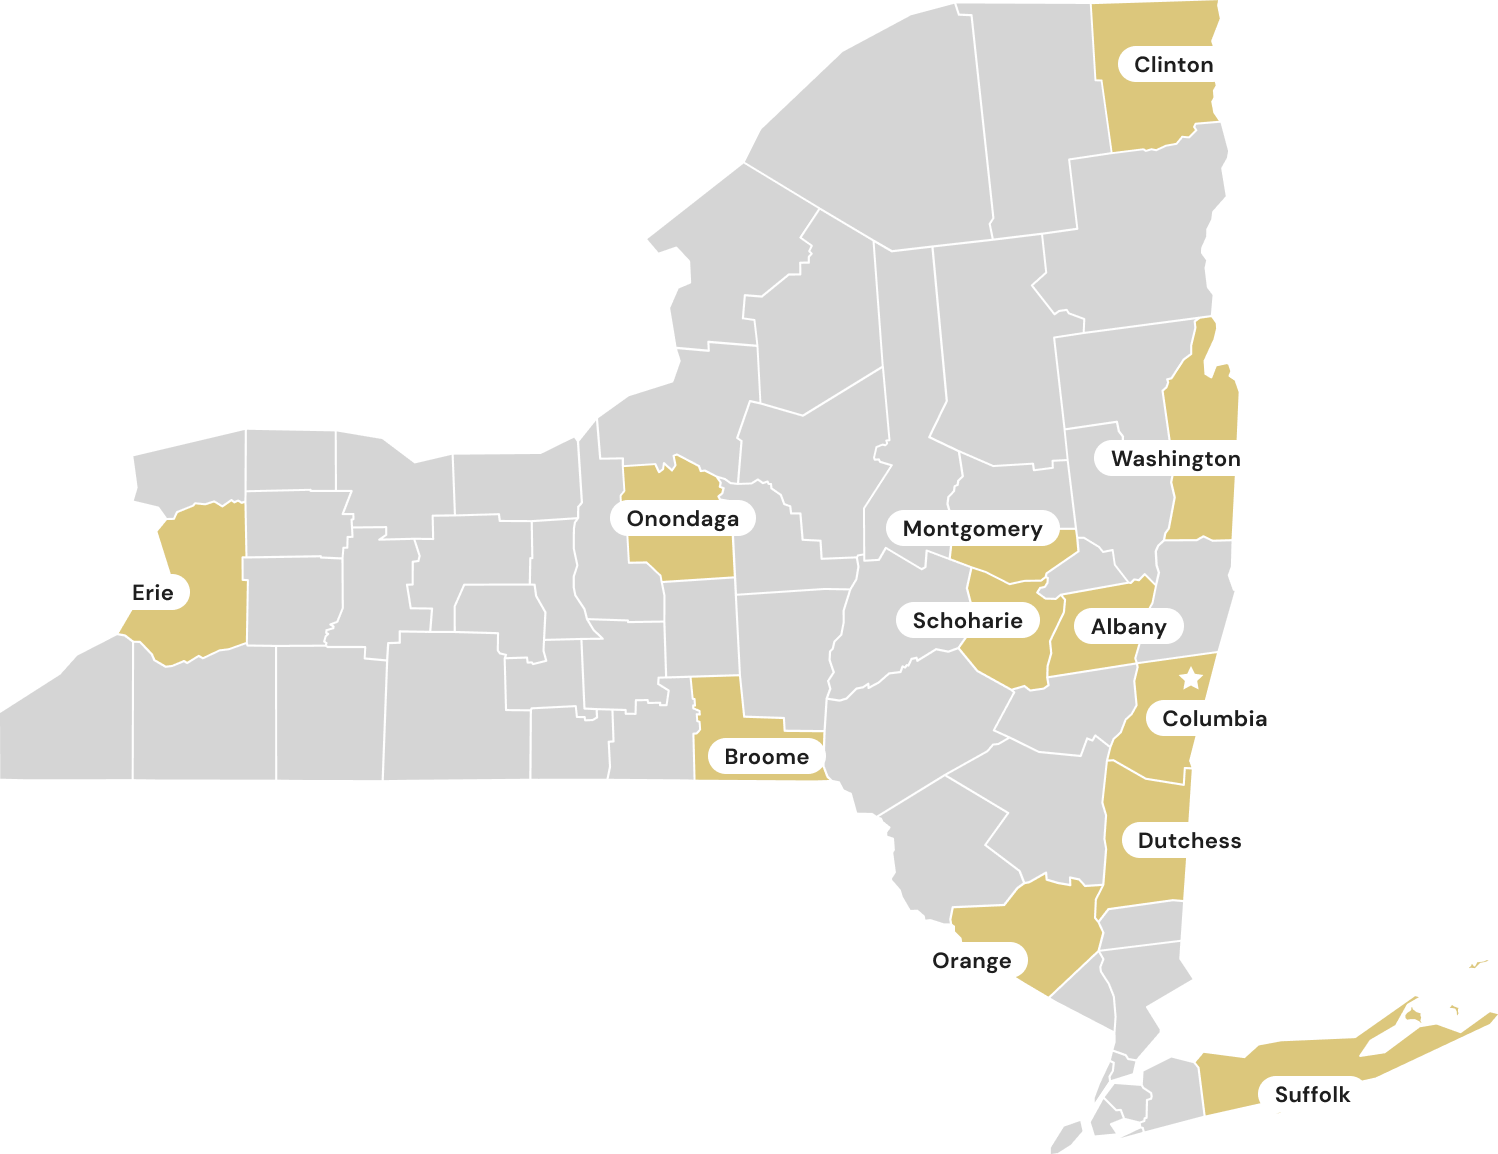 Map of new york state showing selected counties highlighted in yellow, including erie, broome, onondaga, albany, and suffolk, with county names labeled.